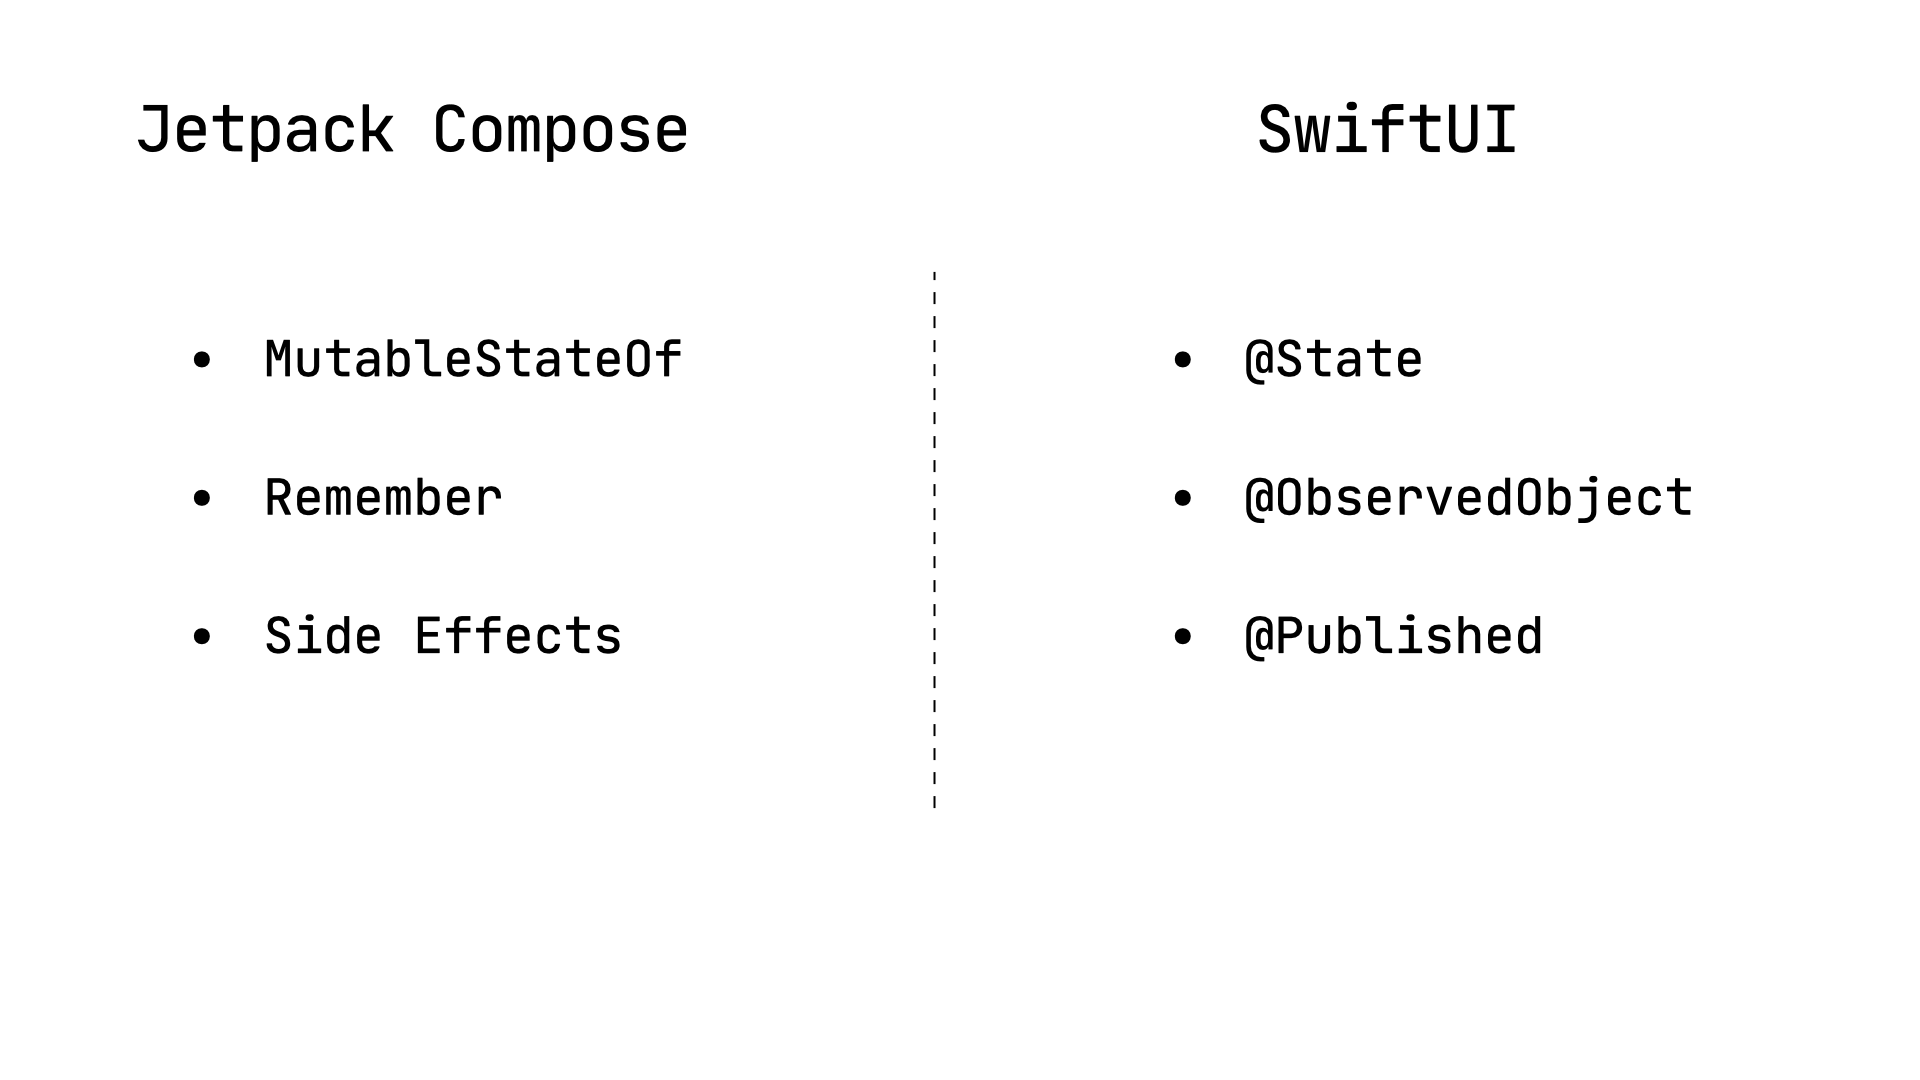 jetpack_compose_and_swiftui_apps